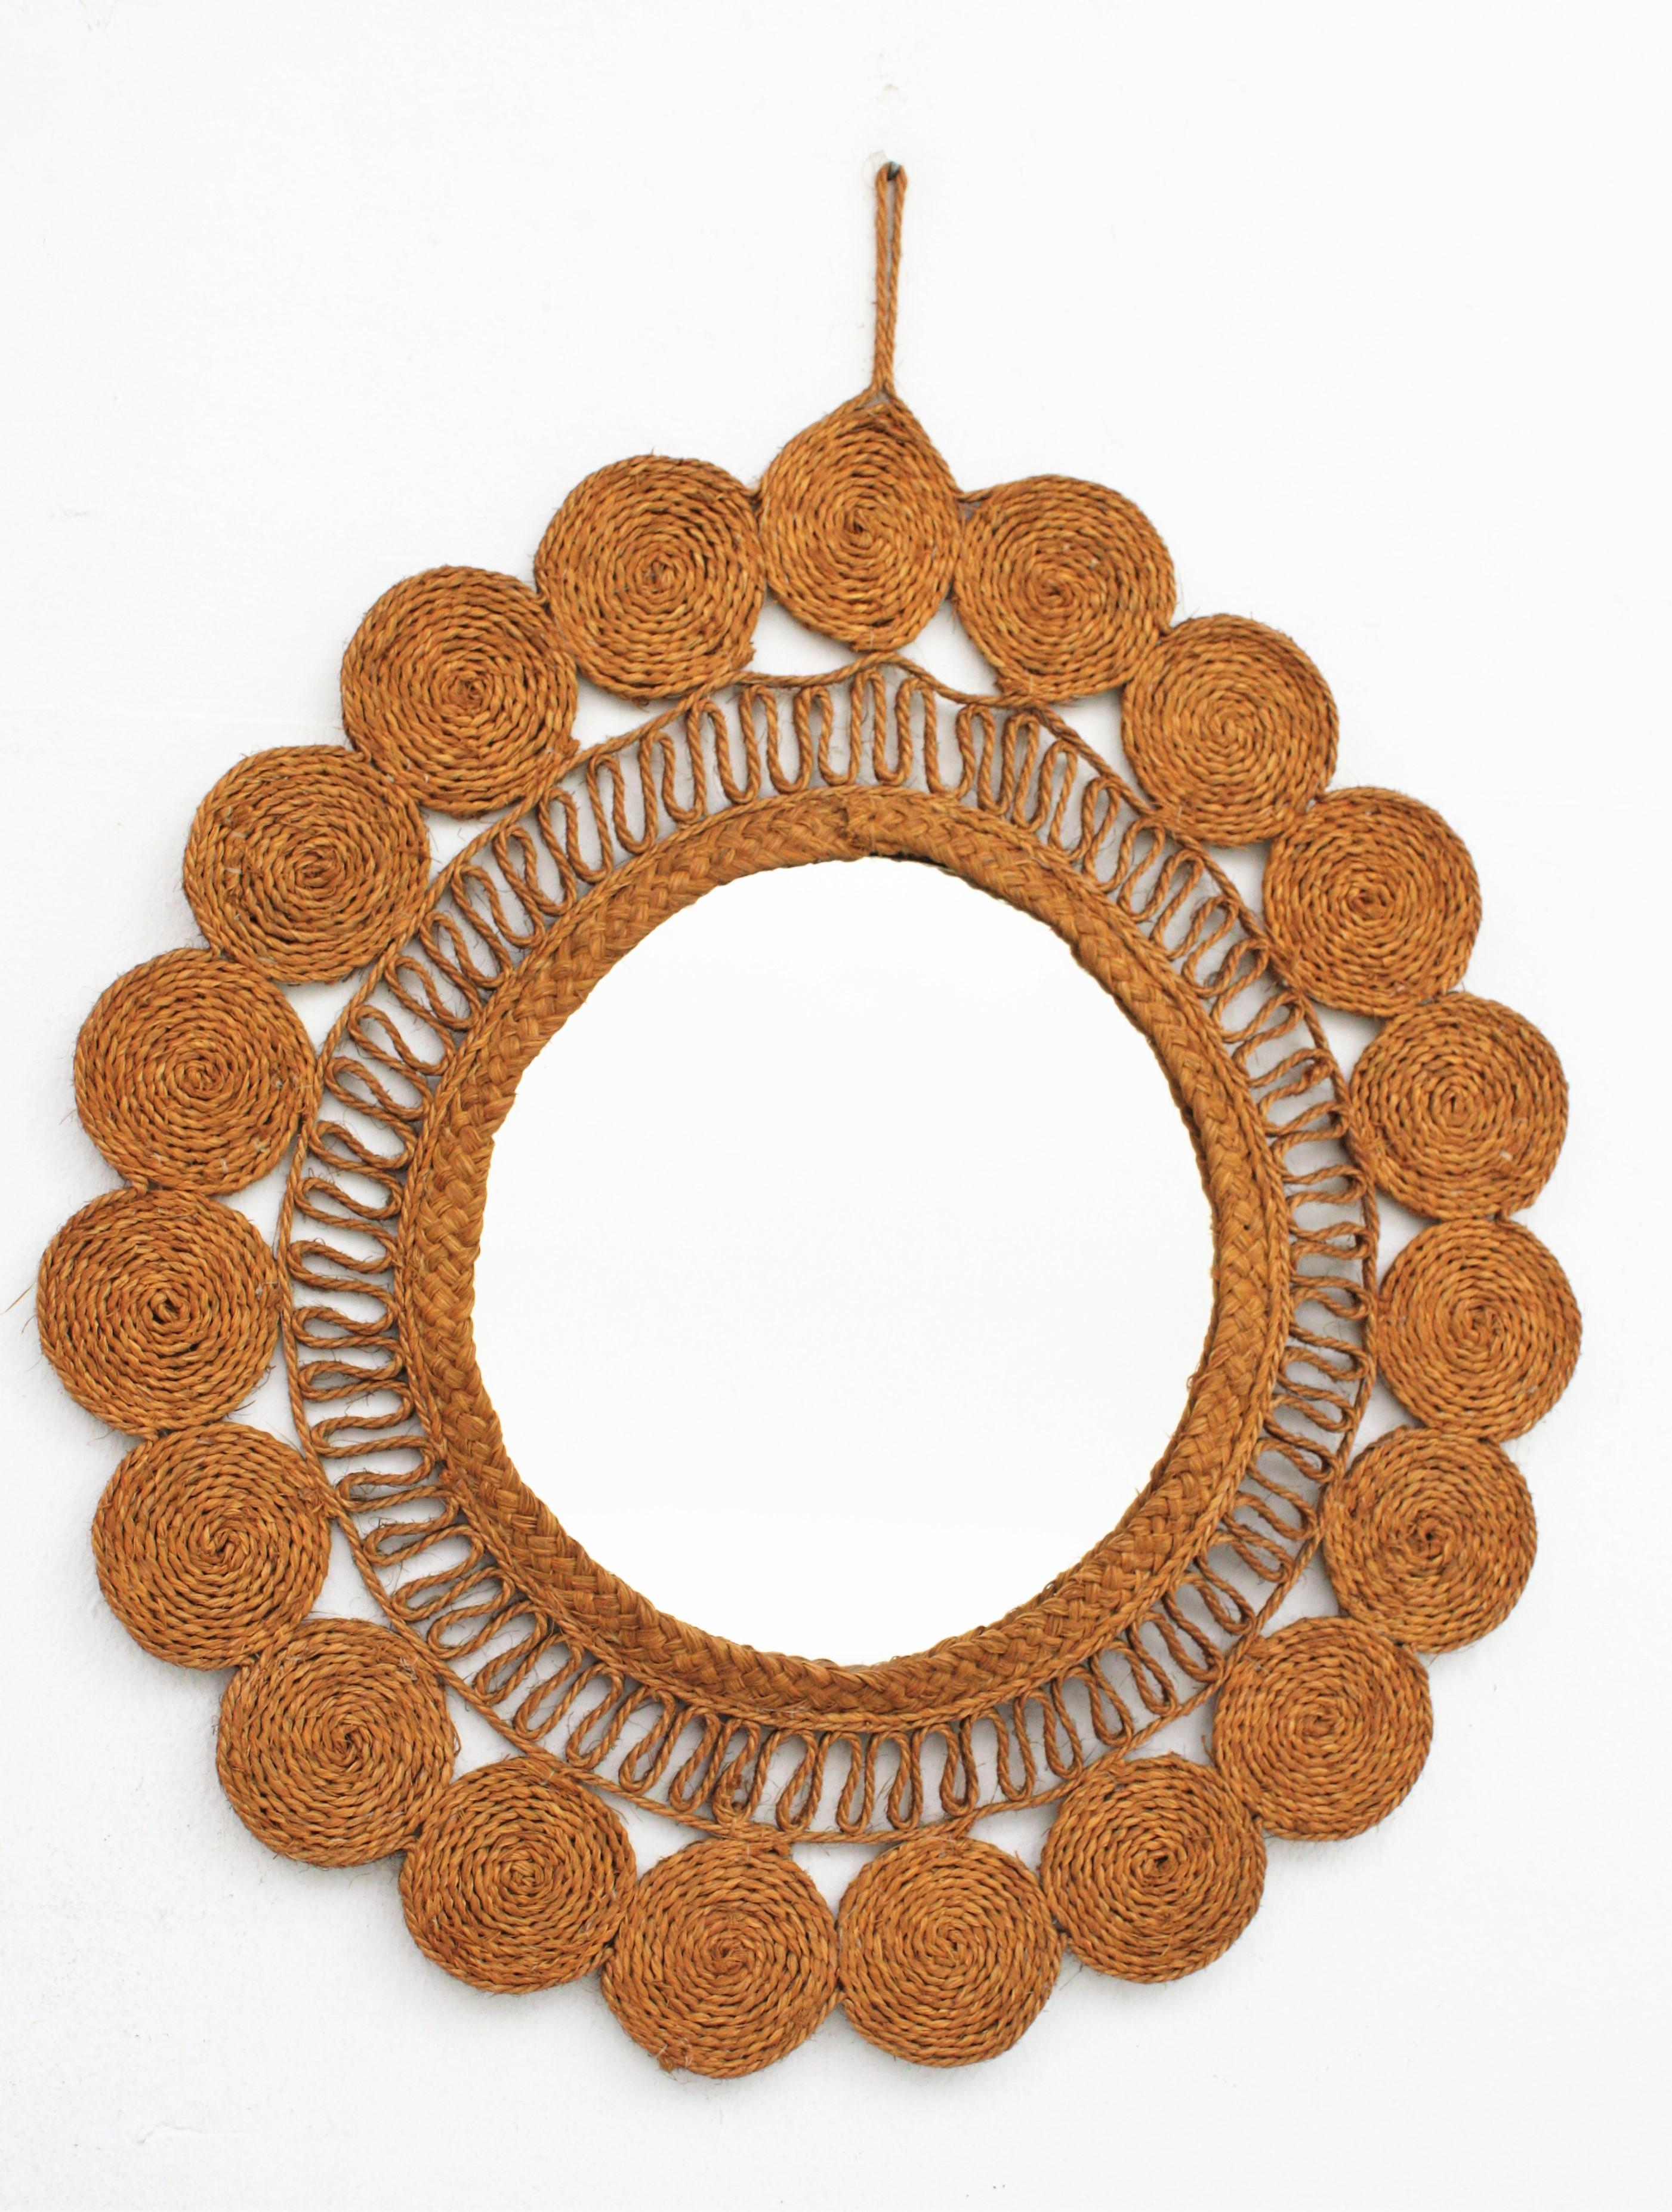 Woven Esparto Rope Wall Mirror, Spain, 1960s In Good Condition For Sale In Barcelona, ES